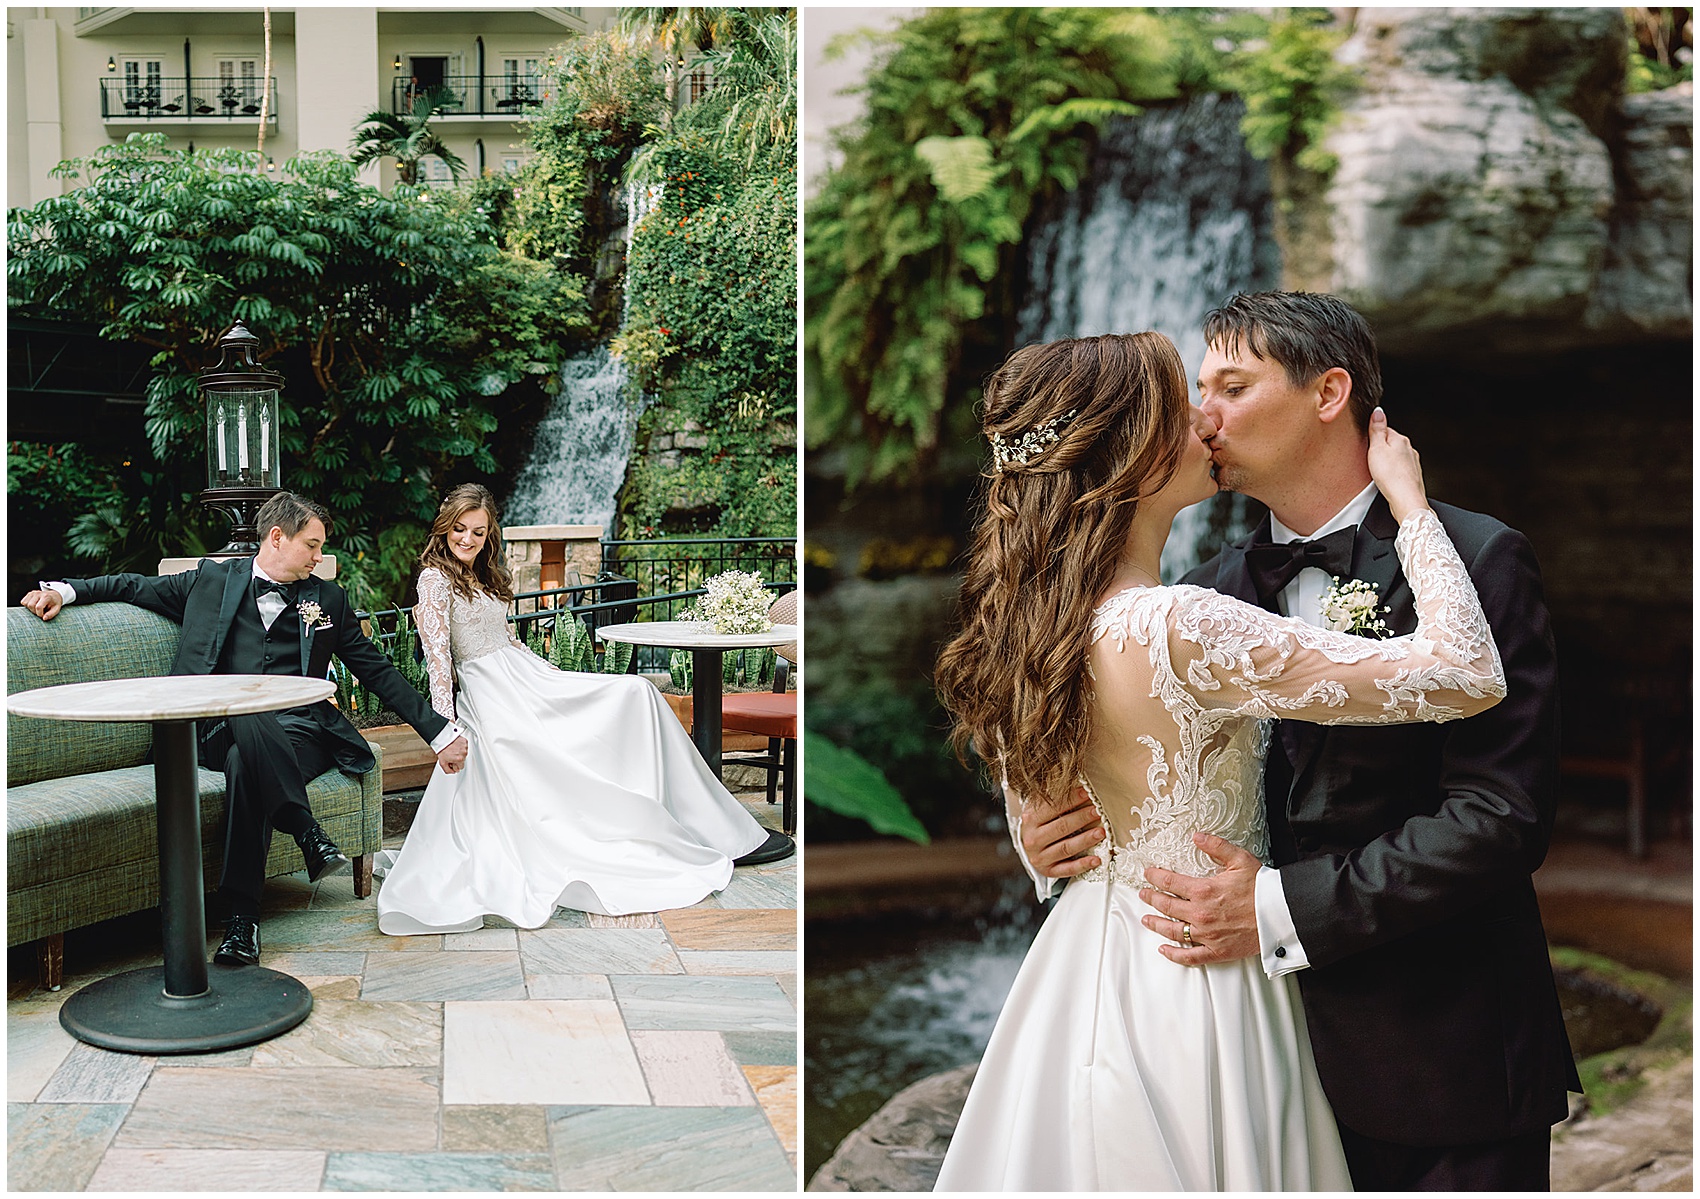 Newlyweds hold hands while sitting in patio furniture and kiss in front of a waterfall